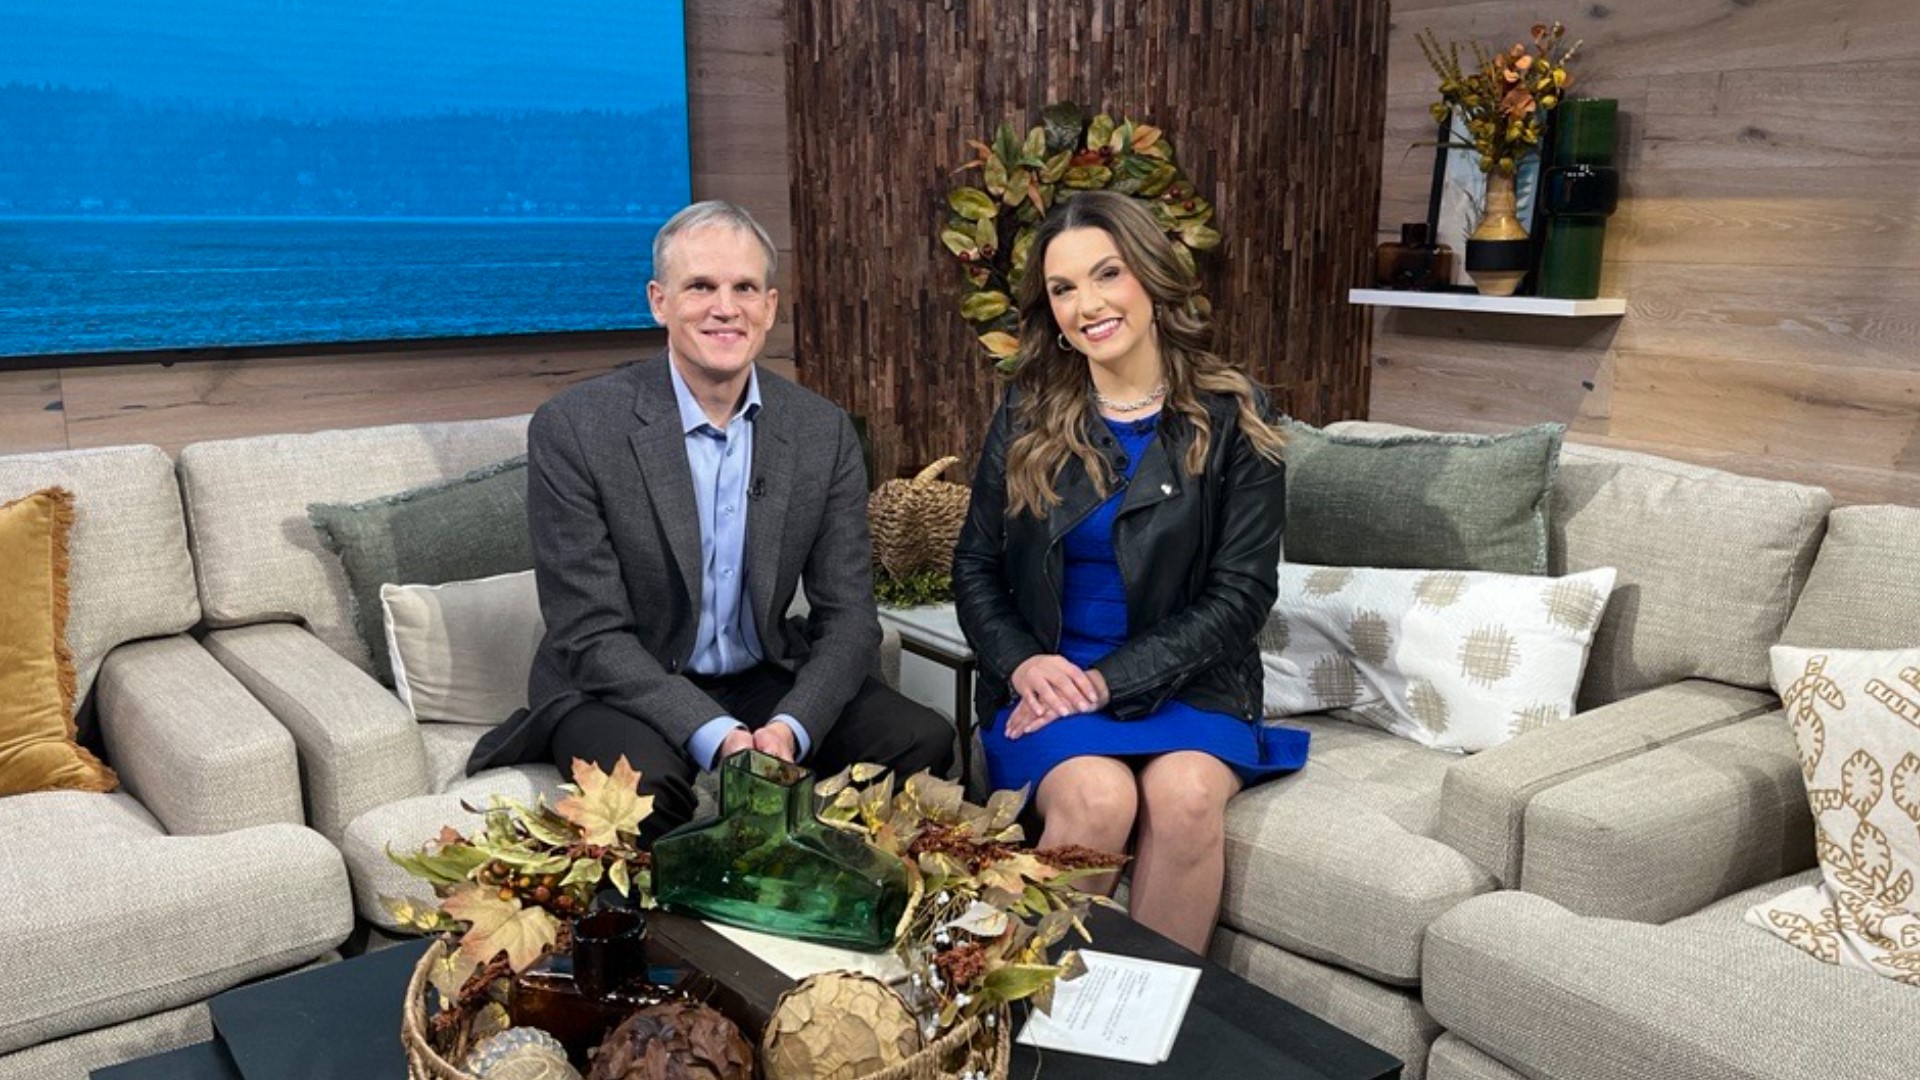 Dr. Todd Freudenberger, pulmonologist at Overlake Medical Center, discusses the risk factors and screening of lung cancer. Sponsored by Overlake Medical Center.